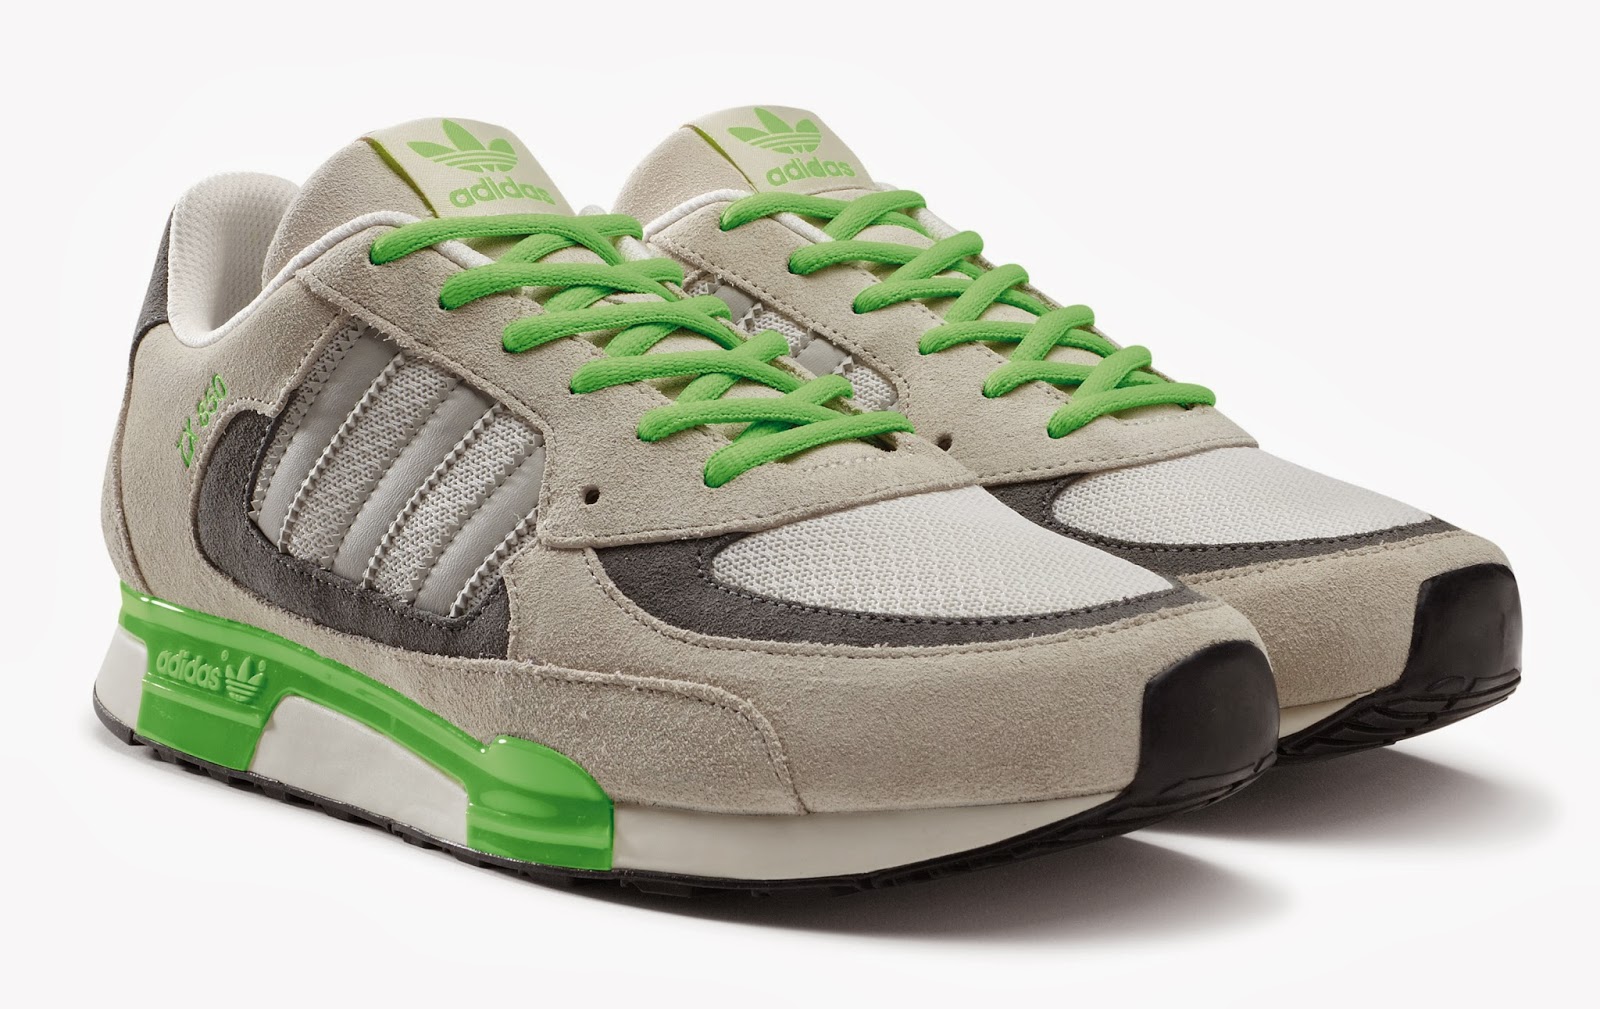 strip droom wacht The ZX850 adidas Originals Sneaker – Maybe You Like